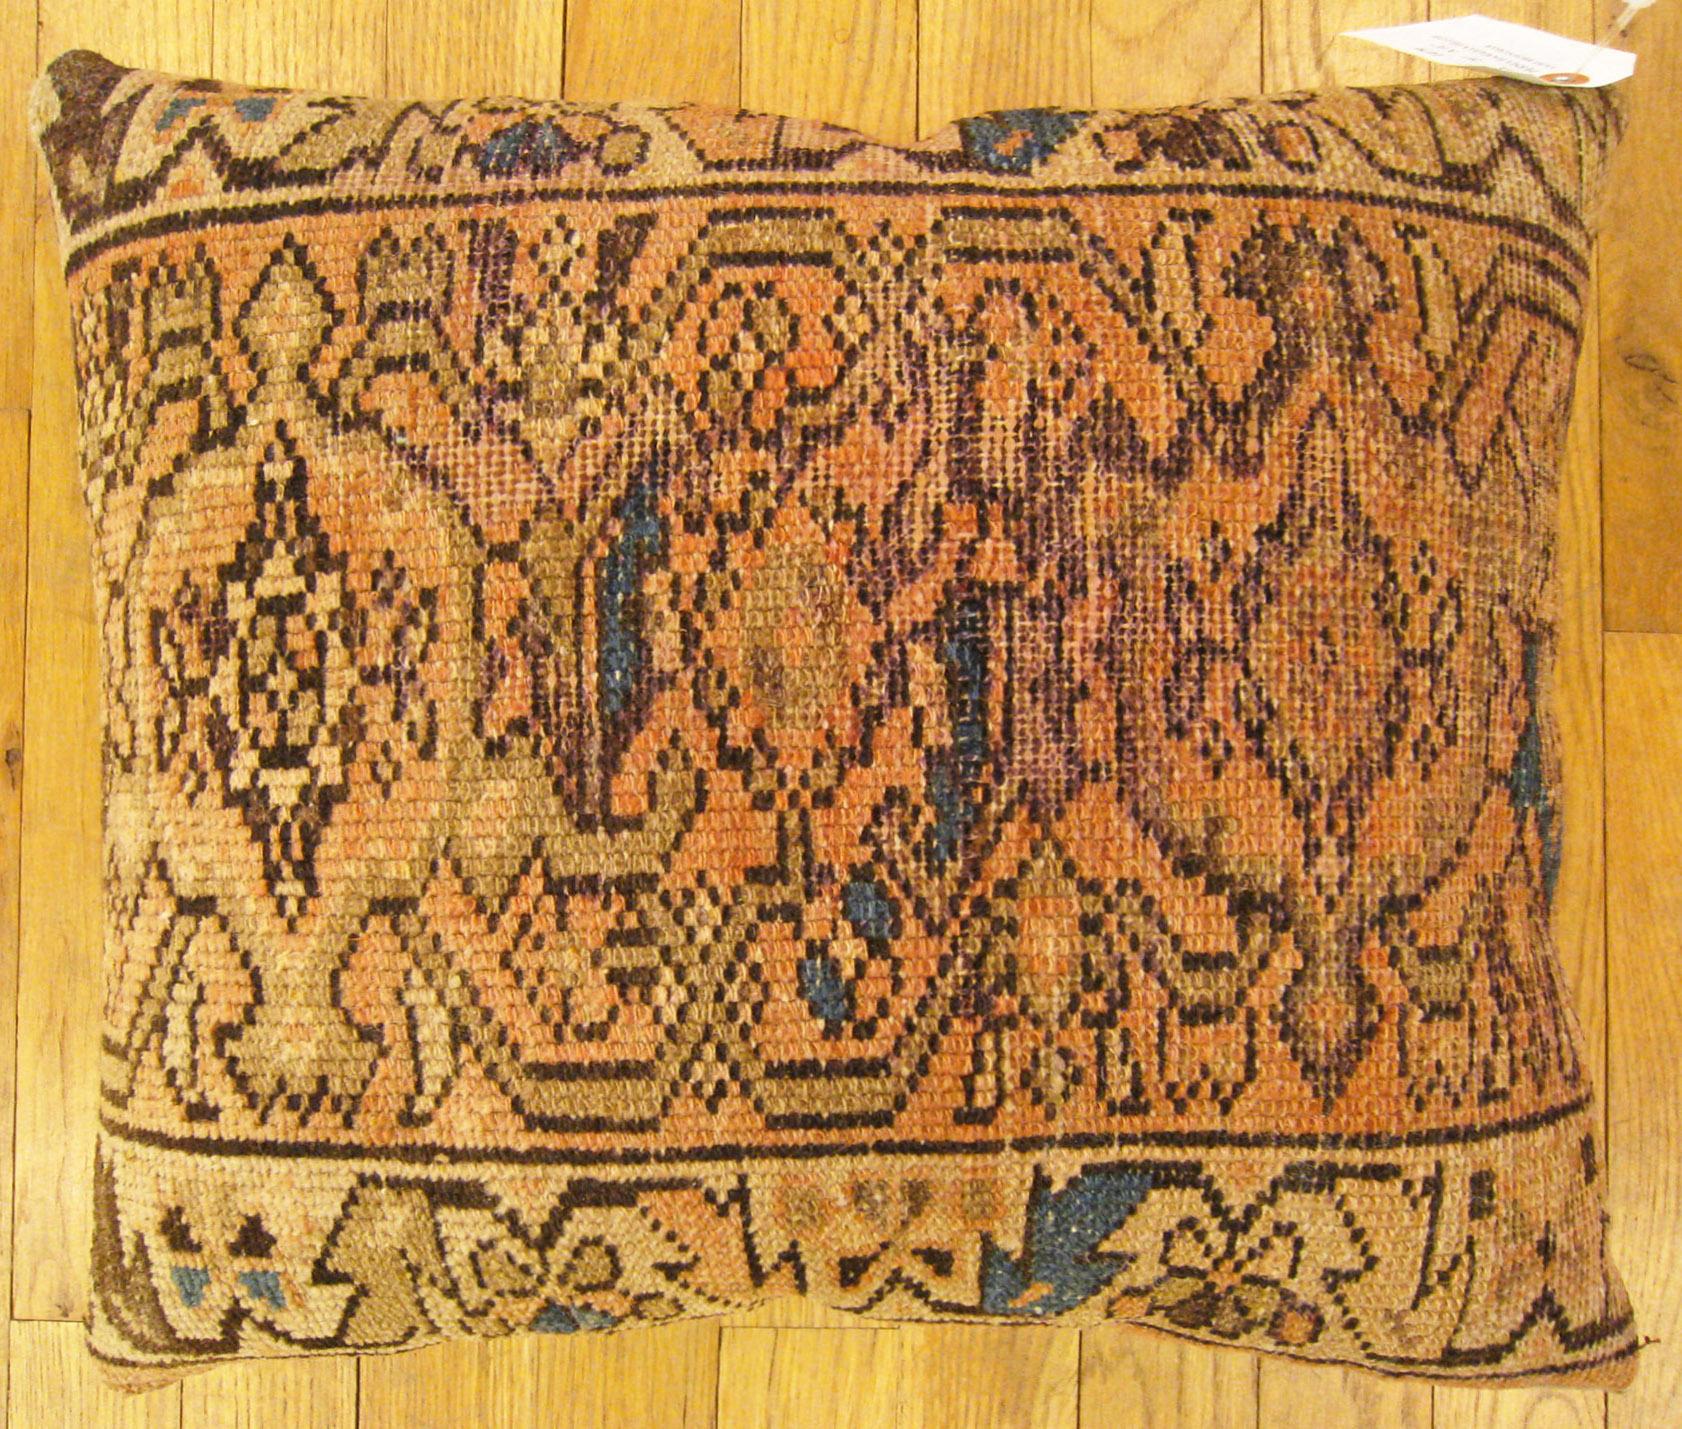 Antique Persian Hamadan Rug Pillow; size 1'8” x 1'4”.

An antique decorative pillow with geometric abstracts allover a light brown central field, size 1'8” x 1'4”. This lovely decorative pillow features an antique fabric of a Hamadan rug on front